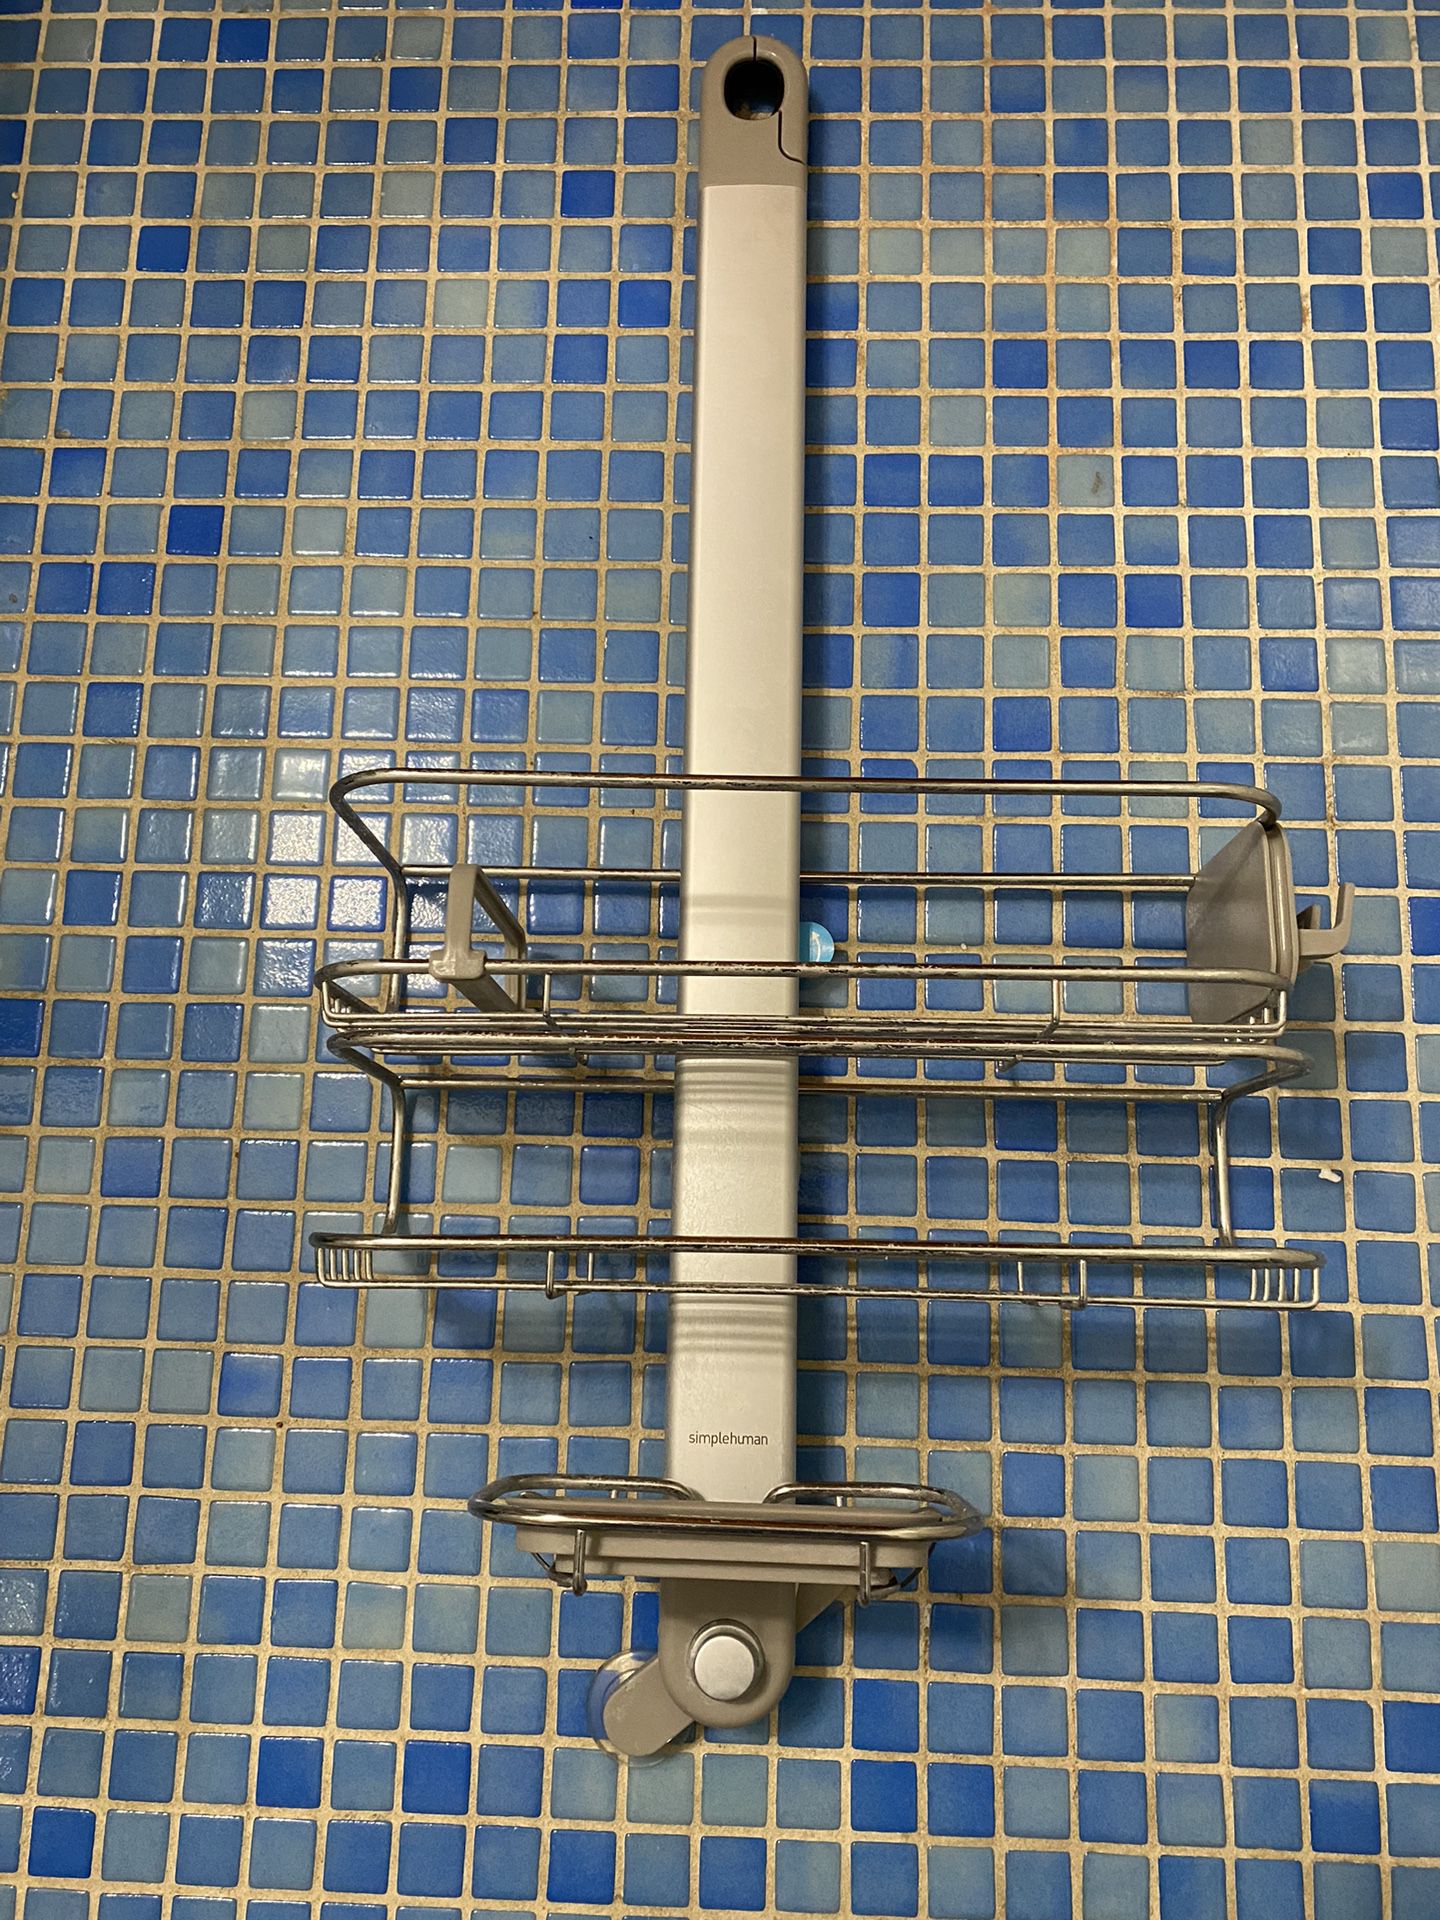 Simple Human Stainless Steel Shower Caddy for Sale in Arcadia, CA - OfferUp